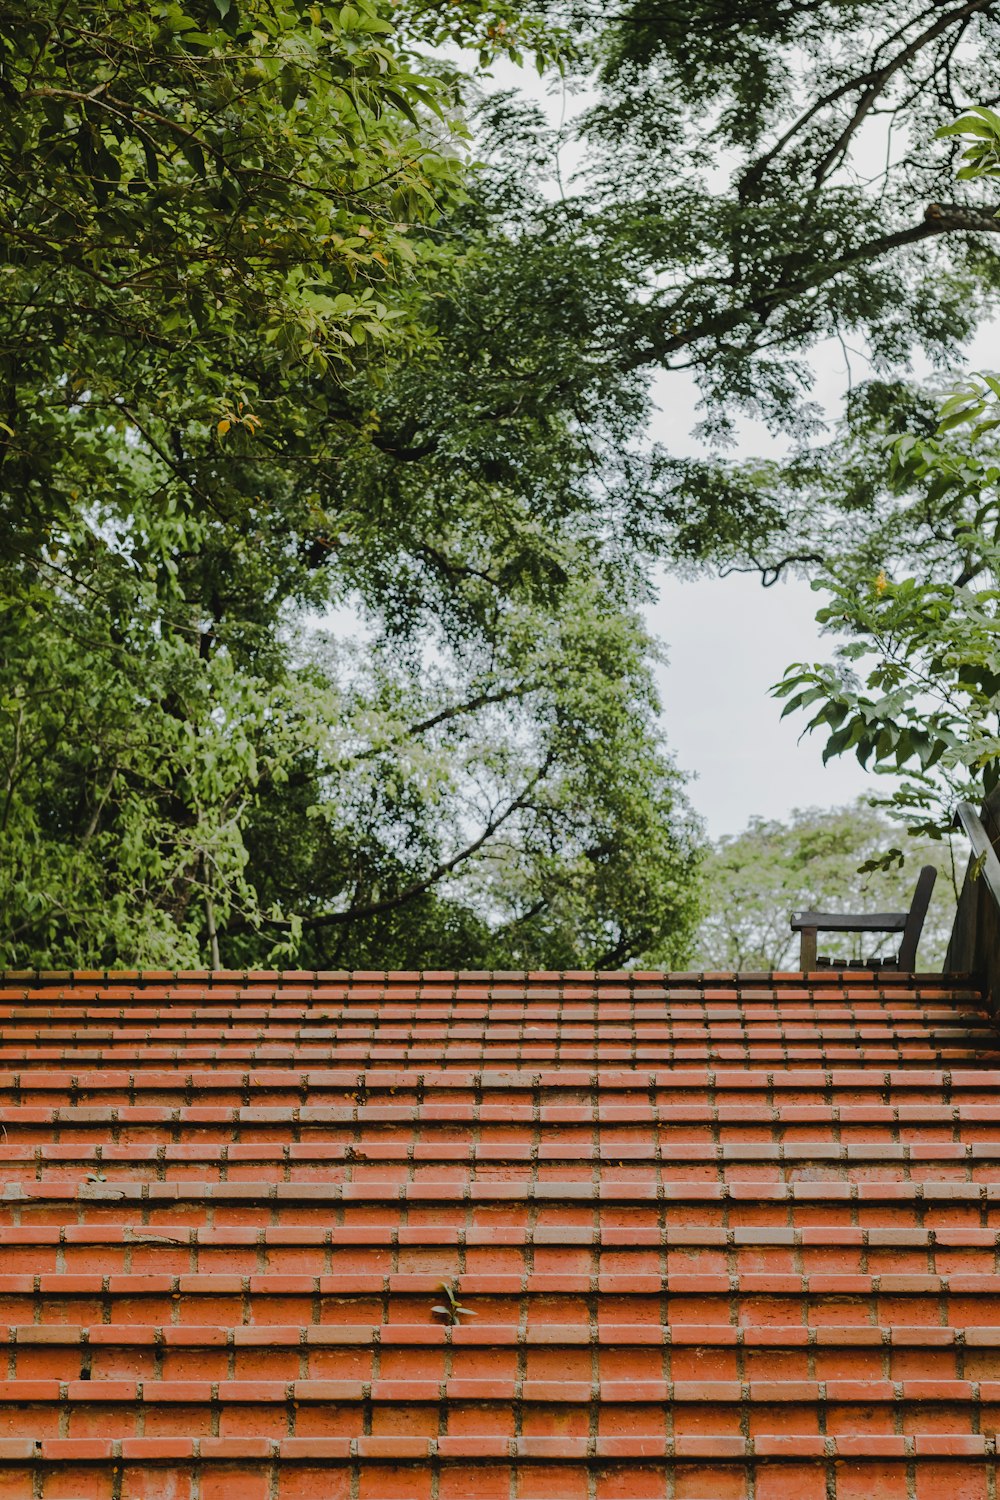 a red tiled roof with trees in the background